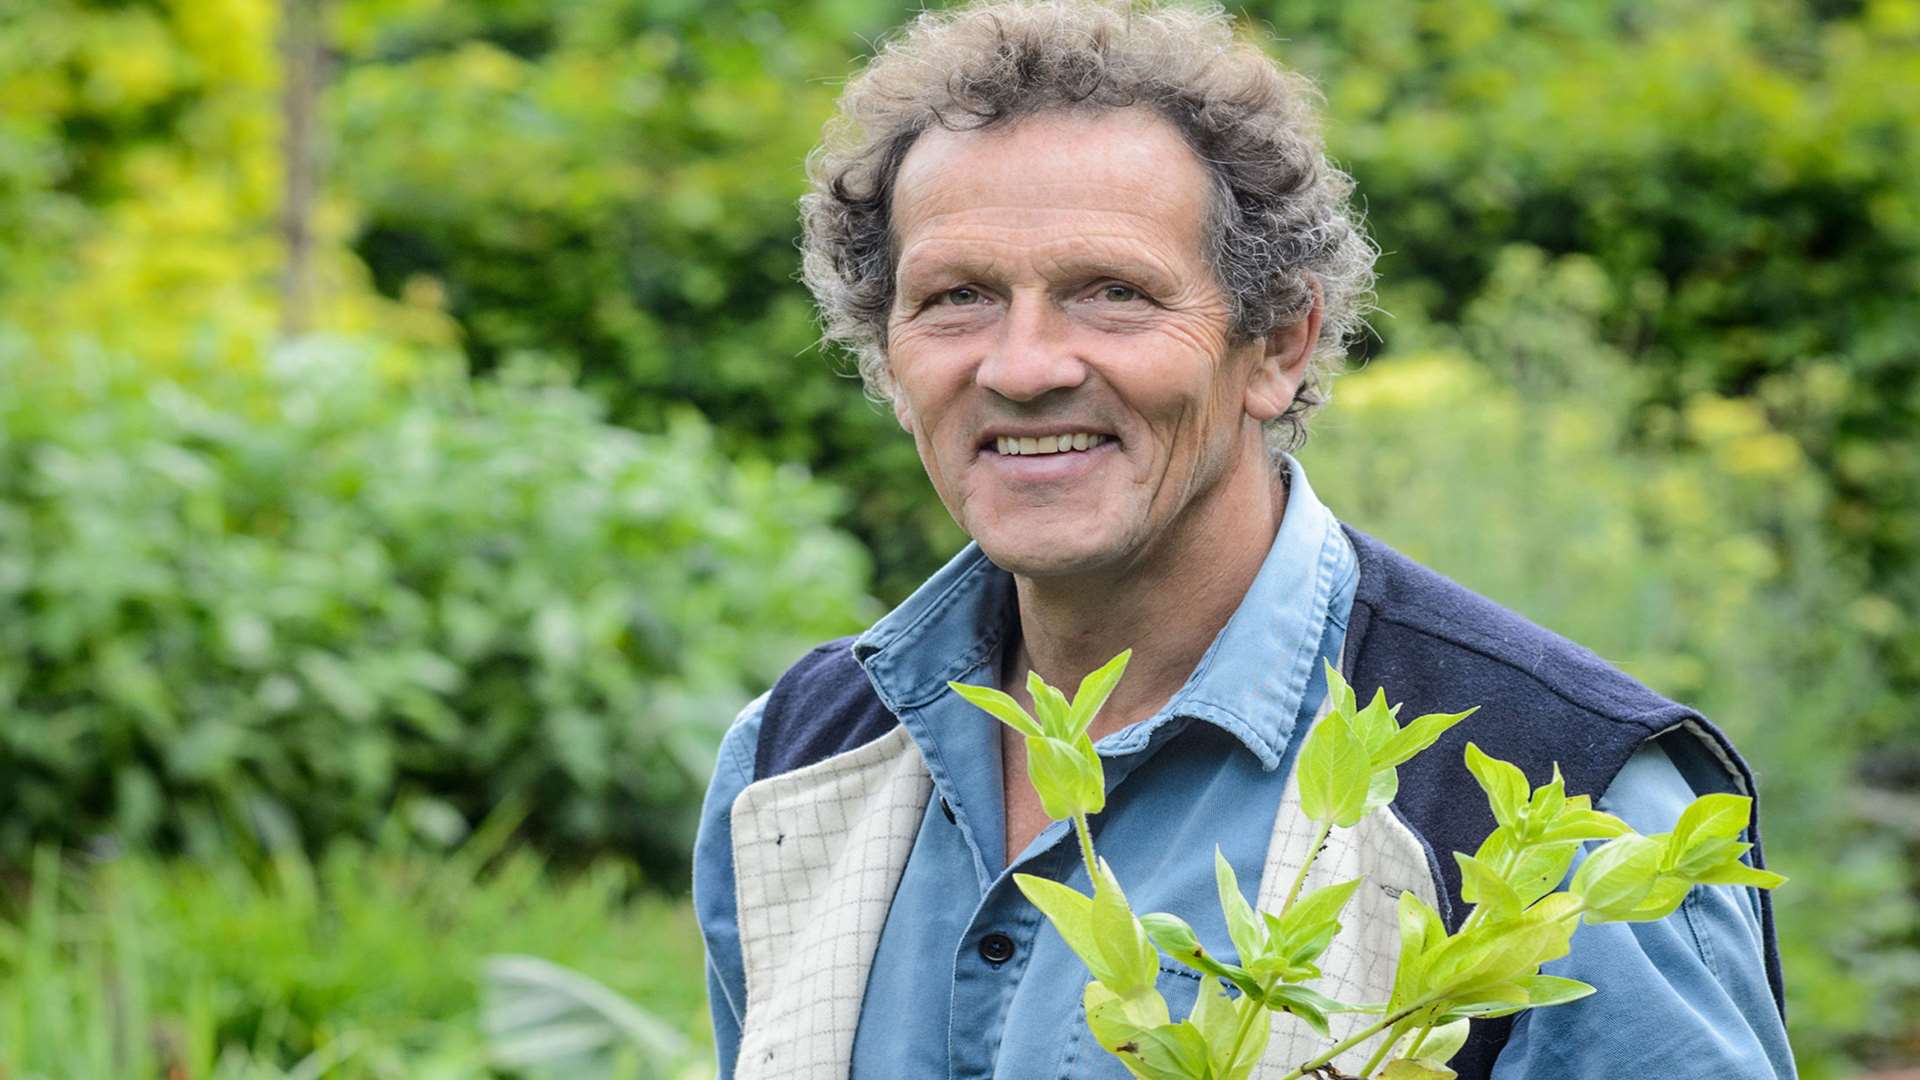 Monty's new series Paradise Gardens is on BBC2 soon Picture credit should read: Jason Ingram/DK/PA